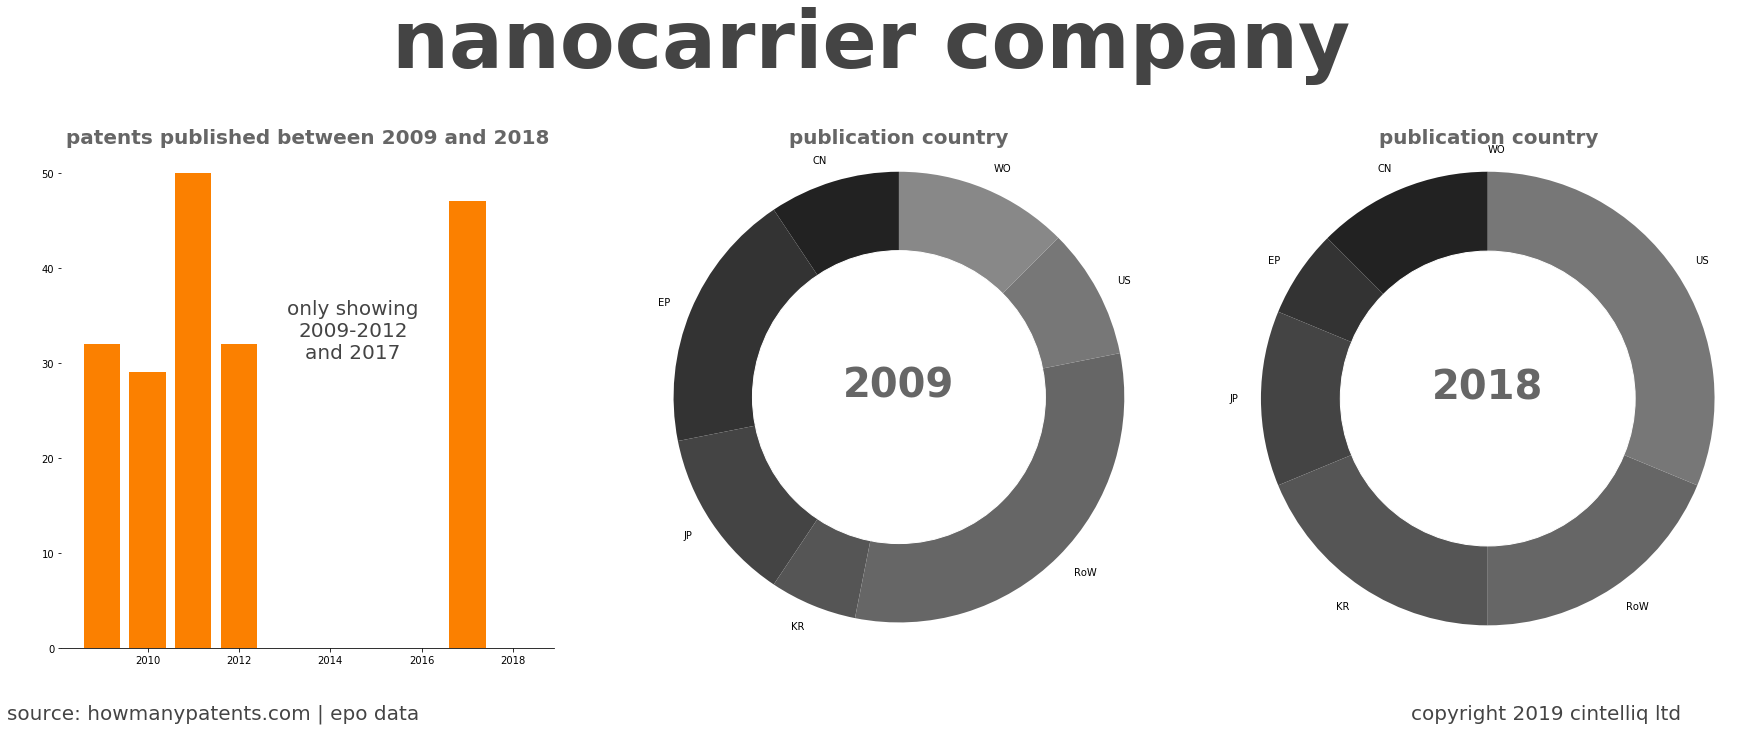 summary of patents for Nanocarrier Company